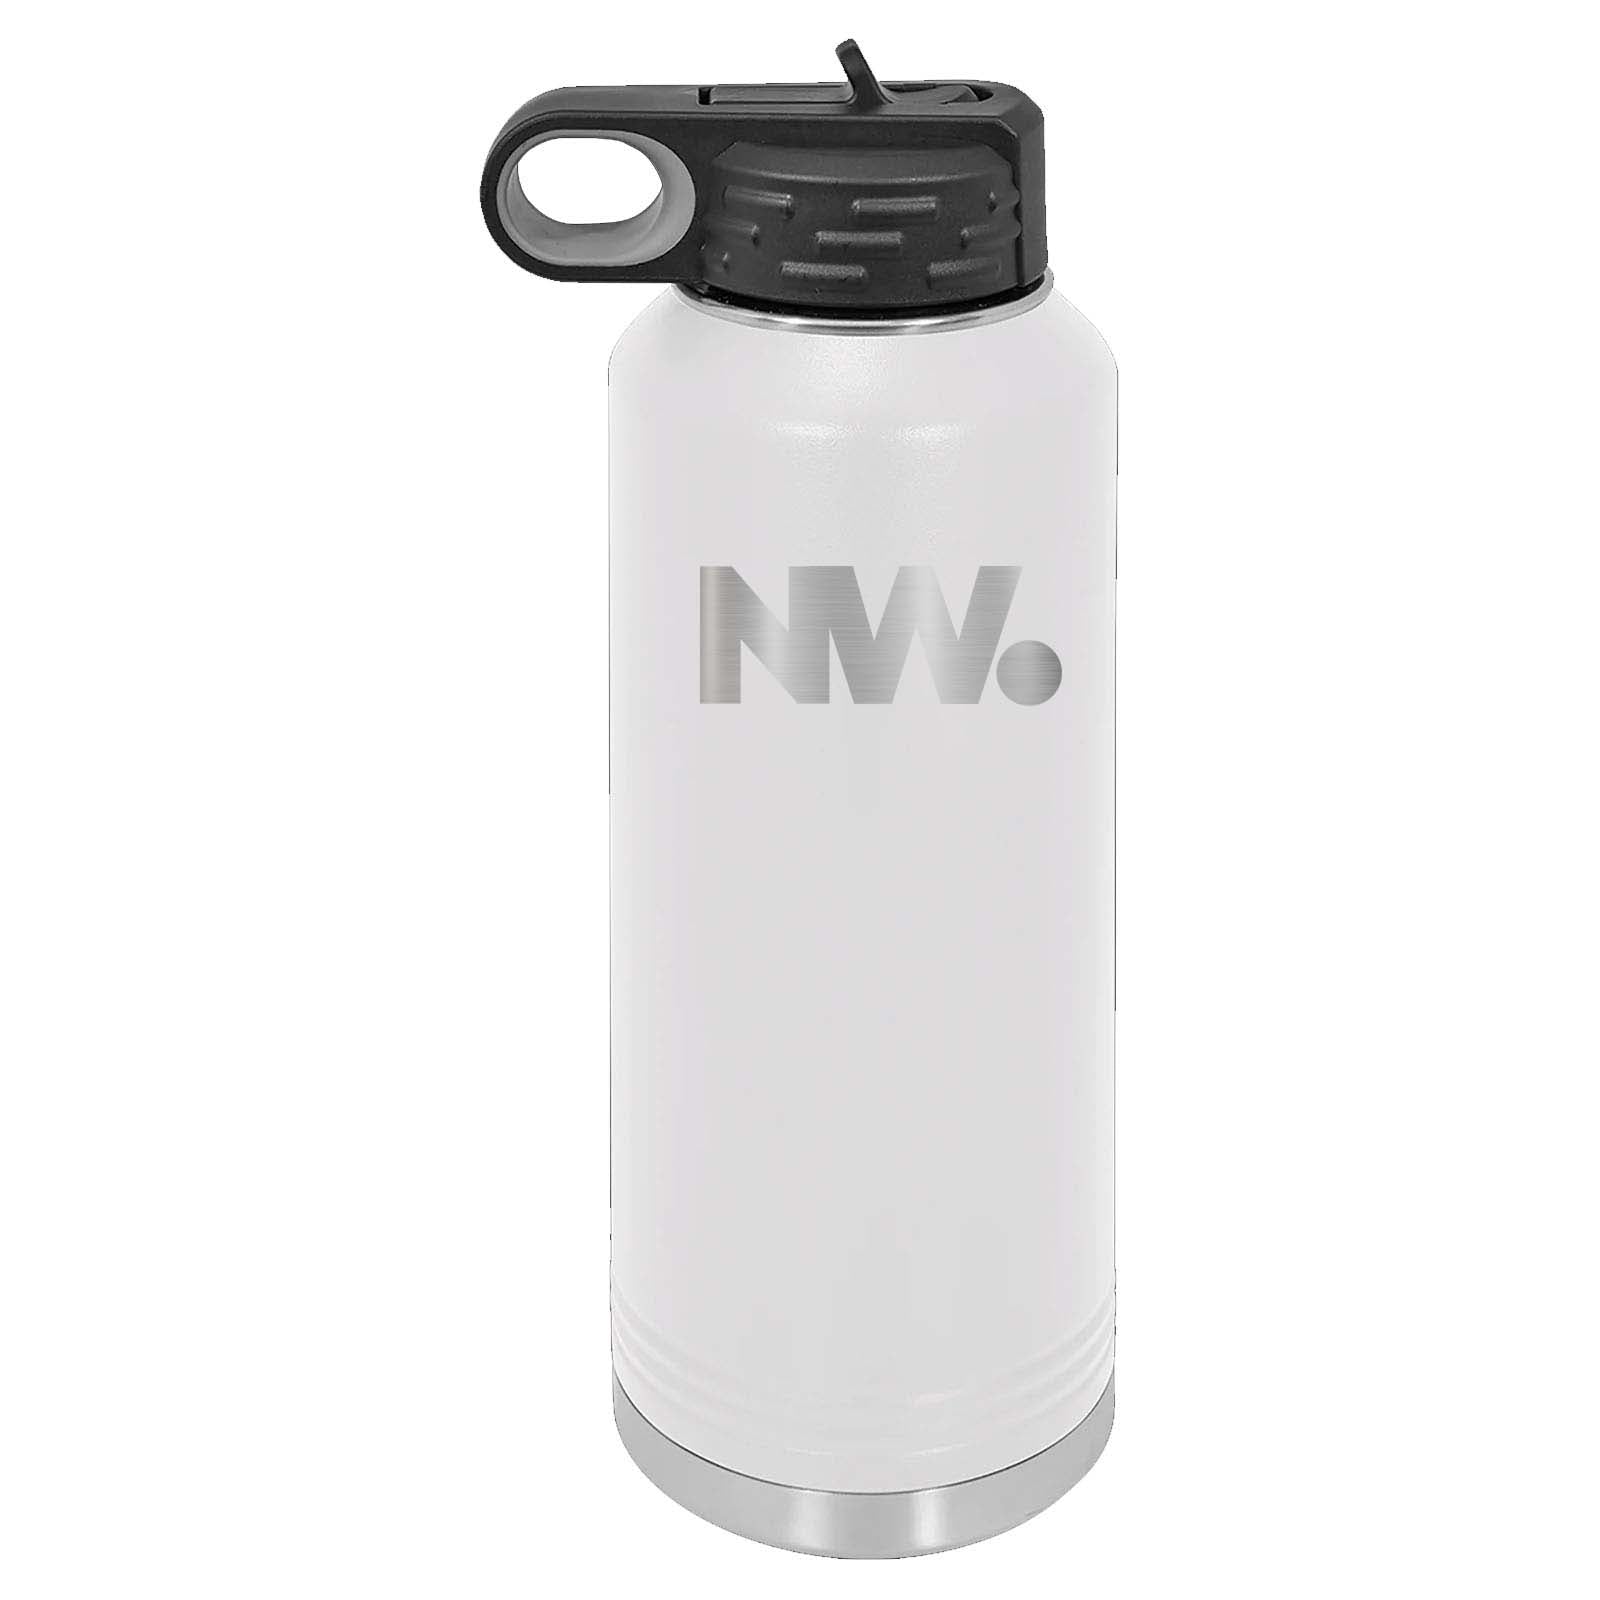 NationWide Video Laser Engraved 32oz Water Bottle with Flip Lid - Mato & Hash